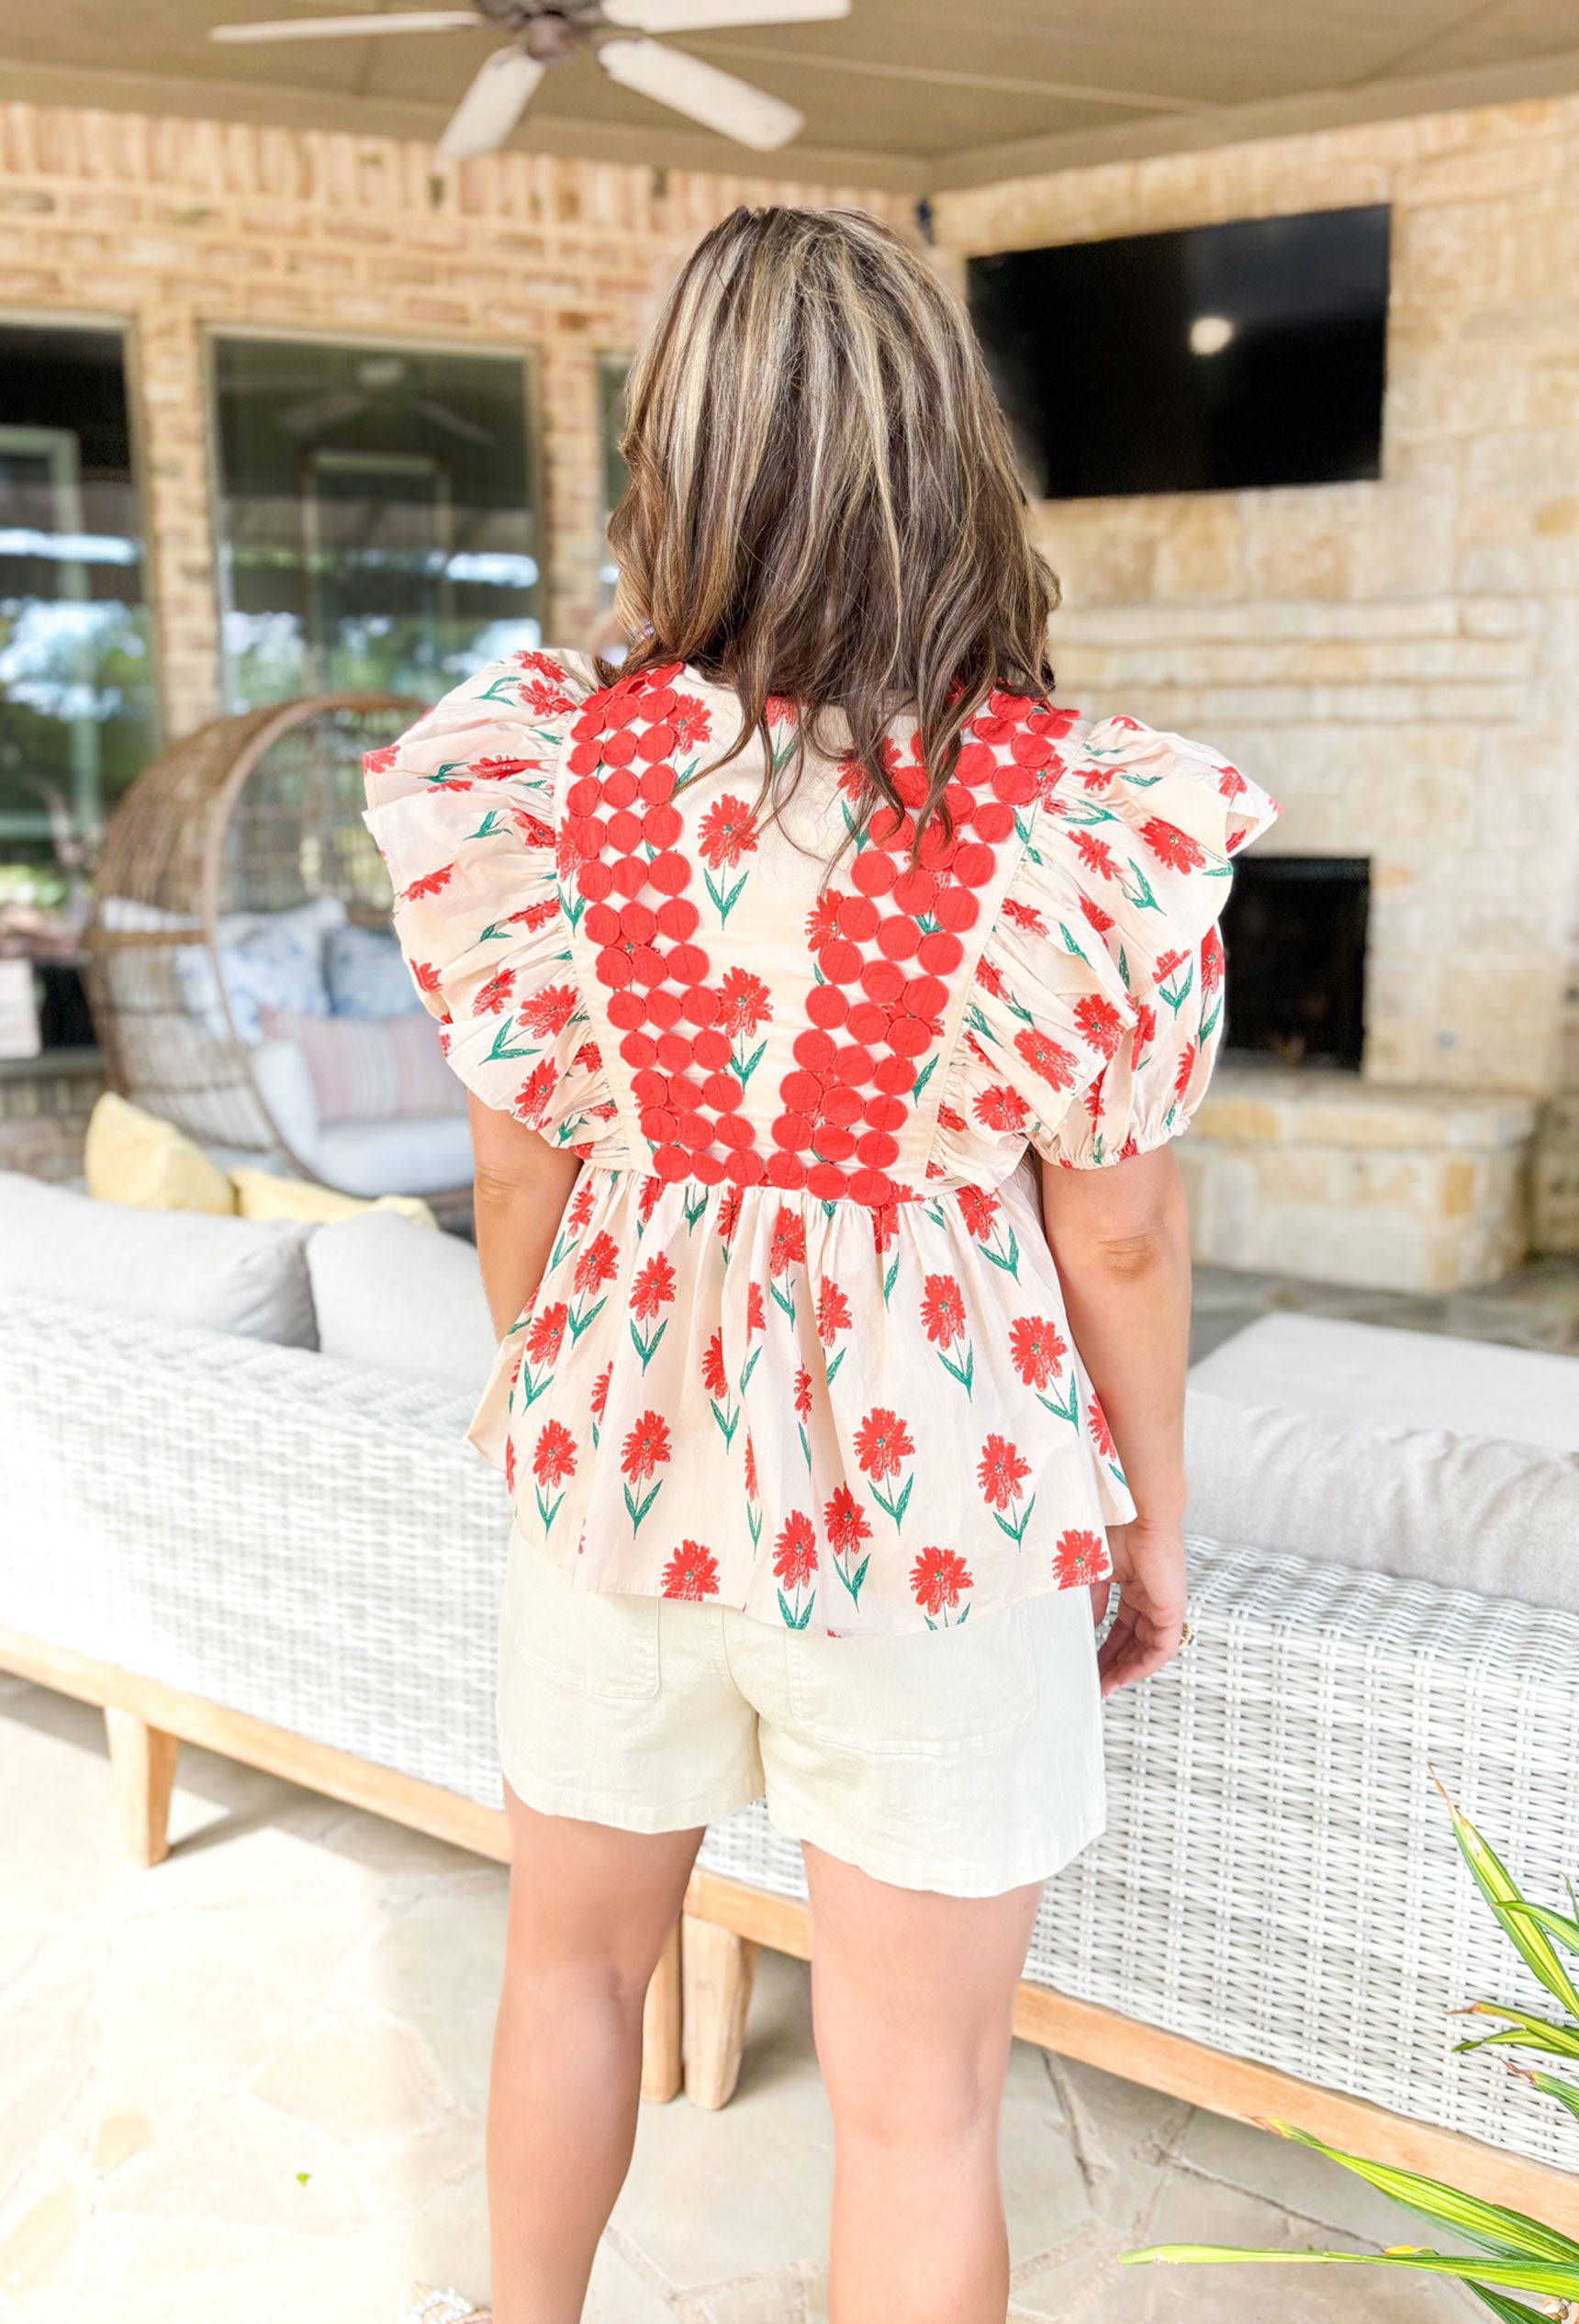 Happy Blooms Floral Blouse, puff/ruffle sleeve blouse with red and green floral print. Red circle overlay across the chest and over the shoulders